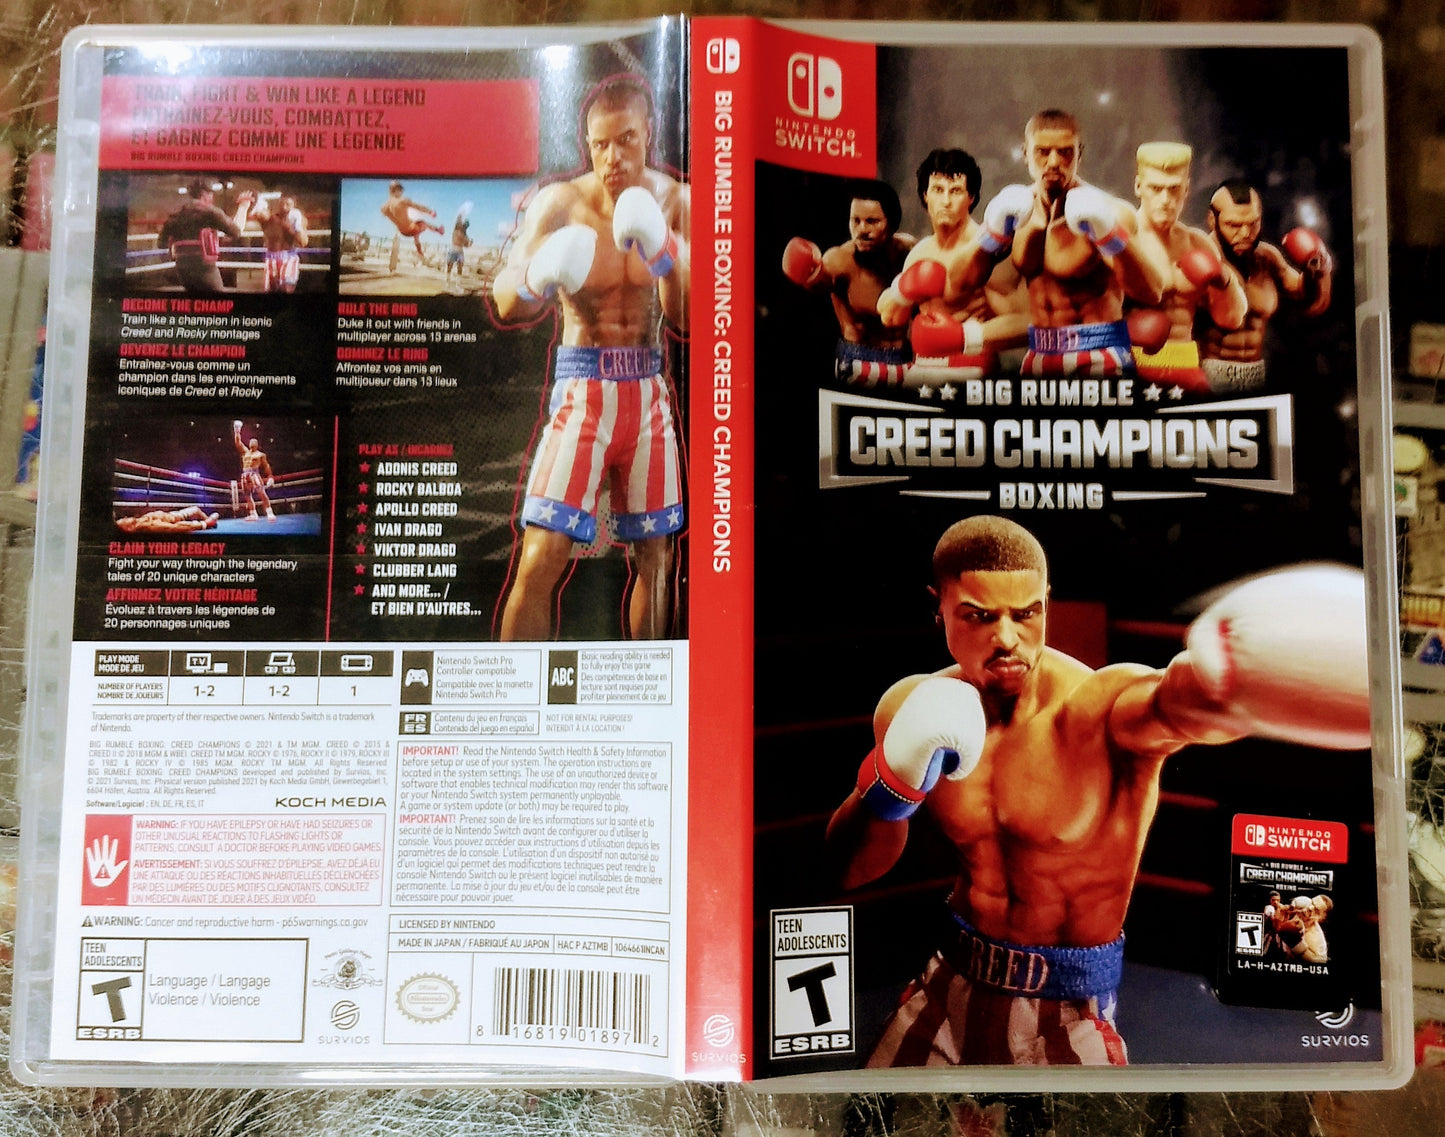 BIG RUMBLE BOXING CREED CHAMPIONS (NINTENDO SWITCH) - jeux video game-x